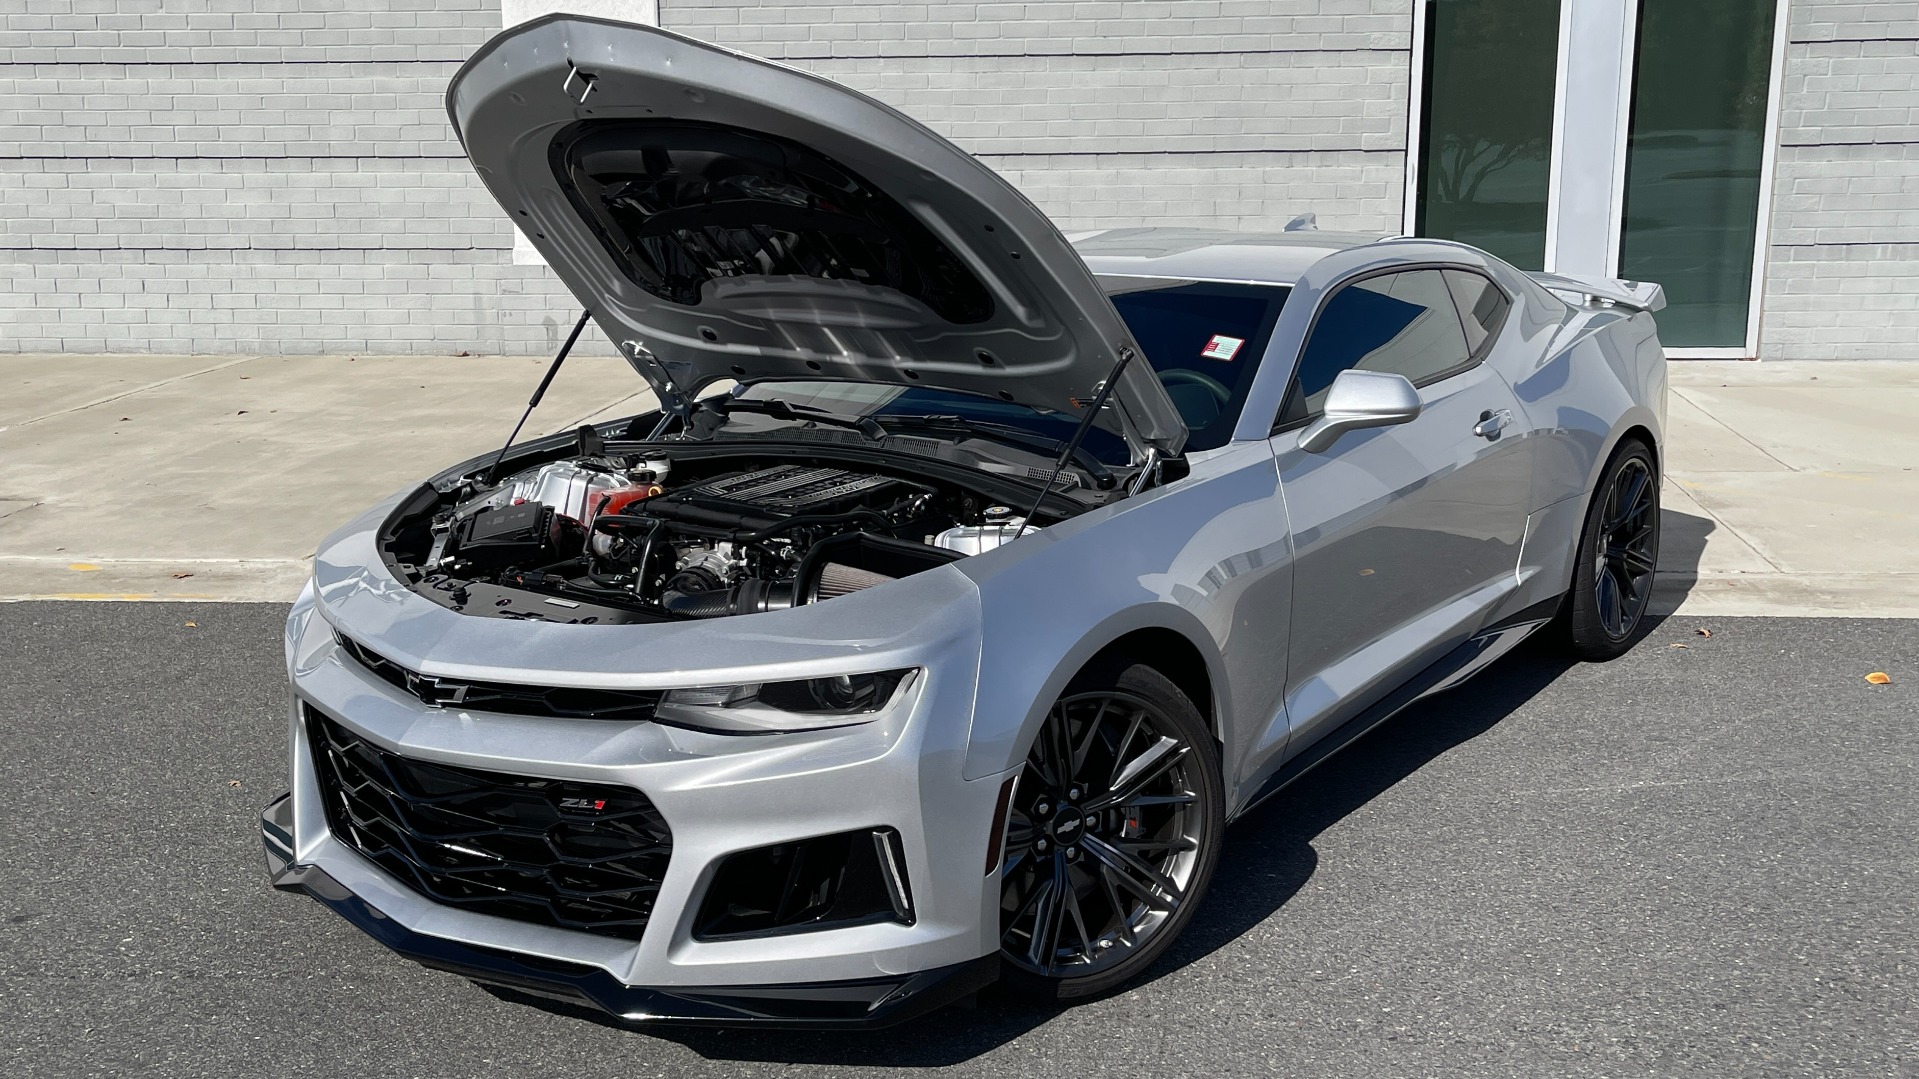 Used 2017 Chevrolet CAMARO ZL1 2DR COUPE / 650HP 6.2L SUPERCHARGED V8 / NAV / REARVIEW for sale Sold at Formula Imports in Charlotte NC 28227 11